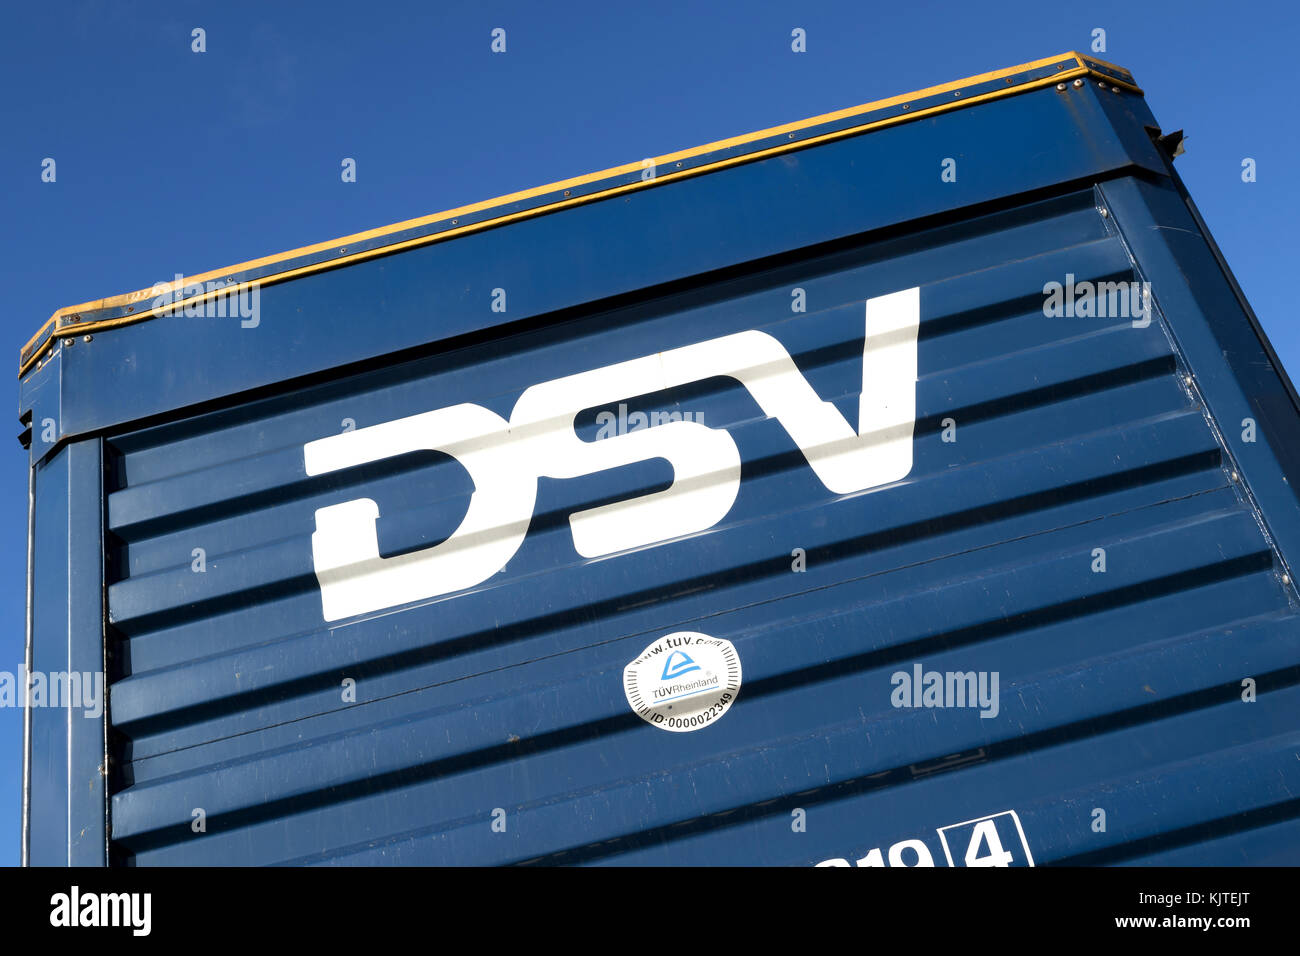 DSV curtain side trailer. DSV A/S is a Danish transport and logistics company offering transport services worldwide by road, air, sea and train. Stock Photo